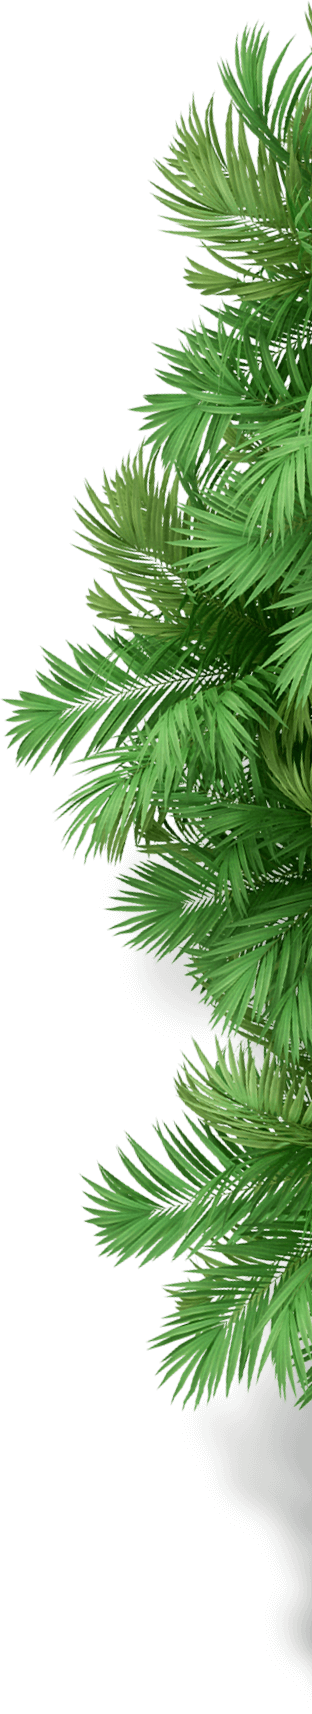 5265-palm-tree-1.png